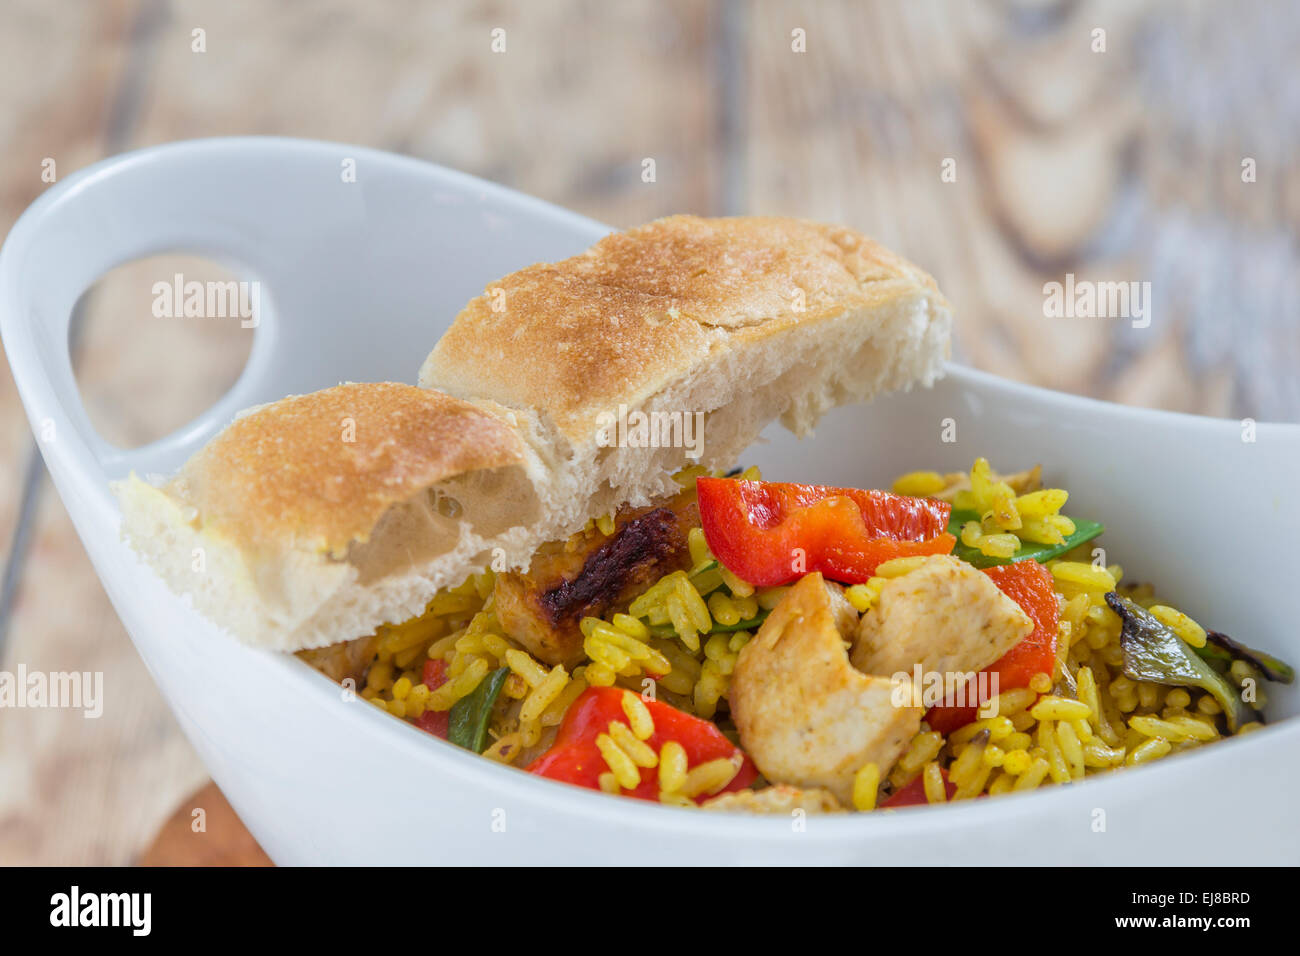 Bowl with curry flavored rice chicken and vegetables on rustic wooden table Stock Photo